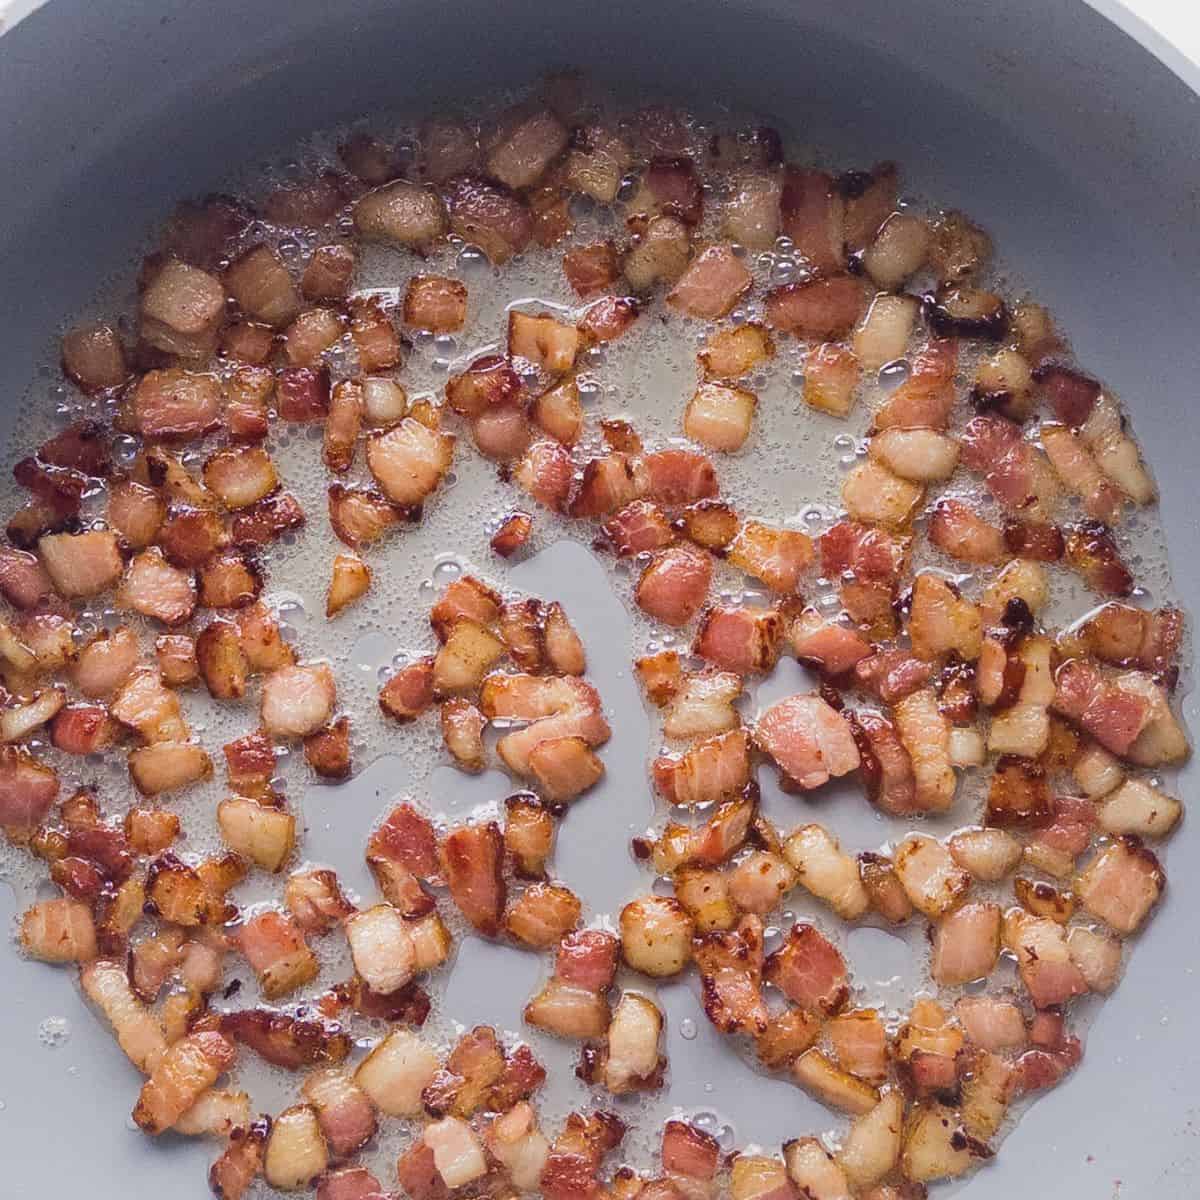 Chopped bacon fried in a skillet